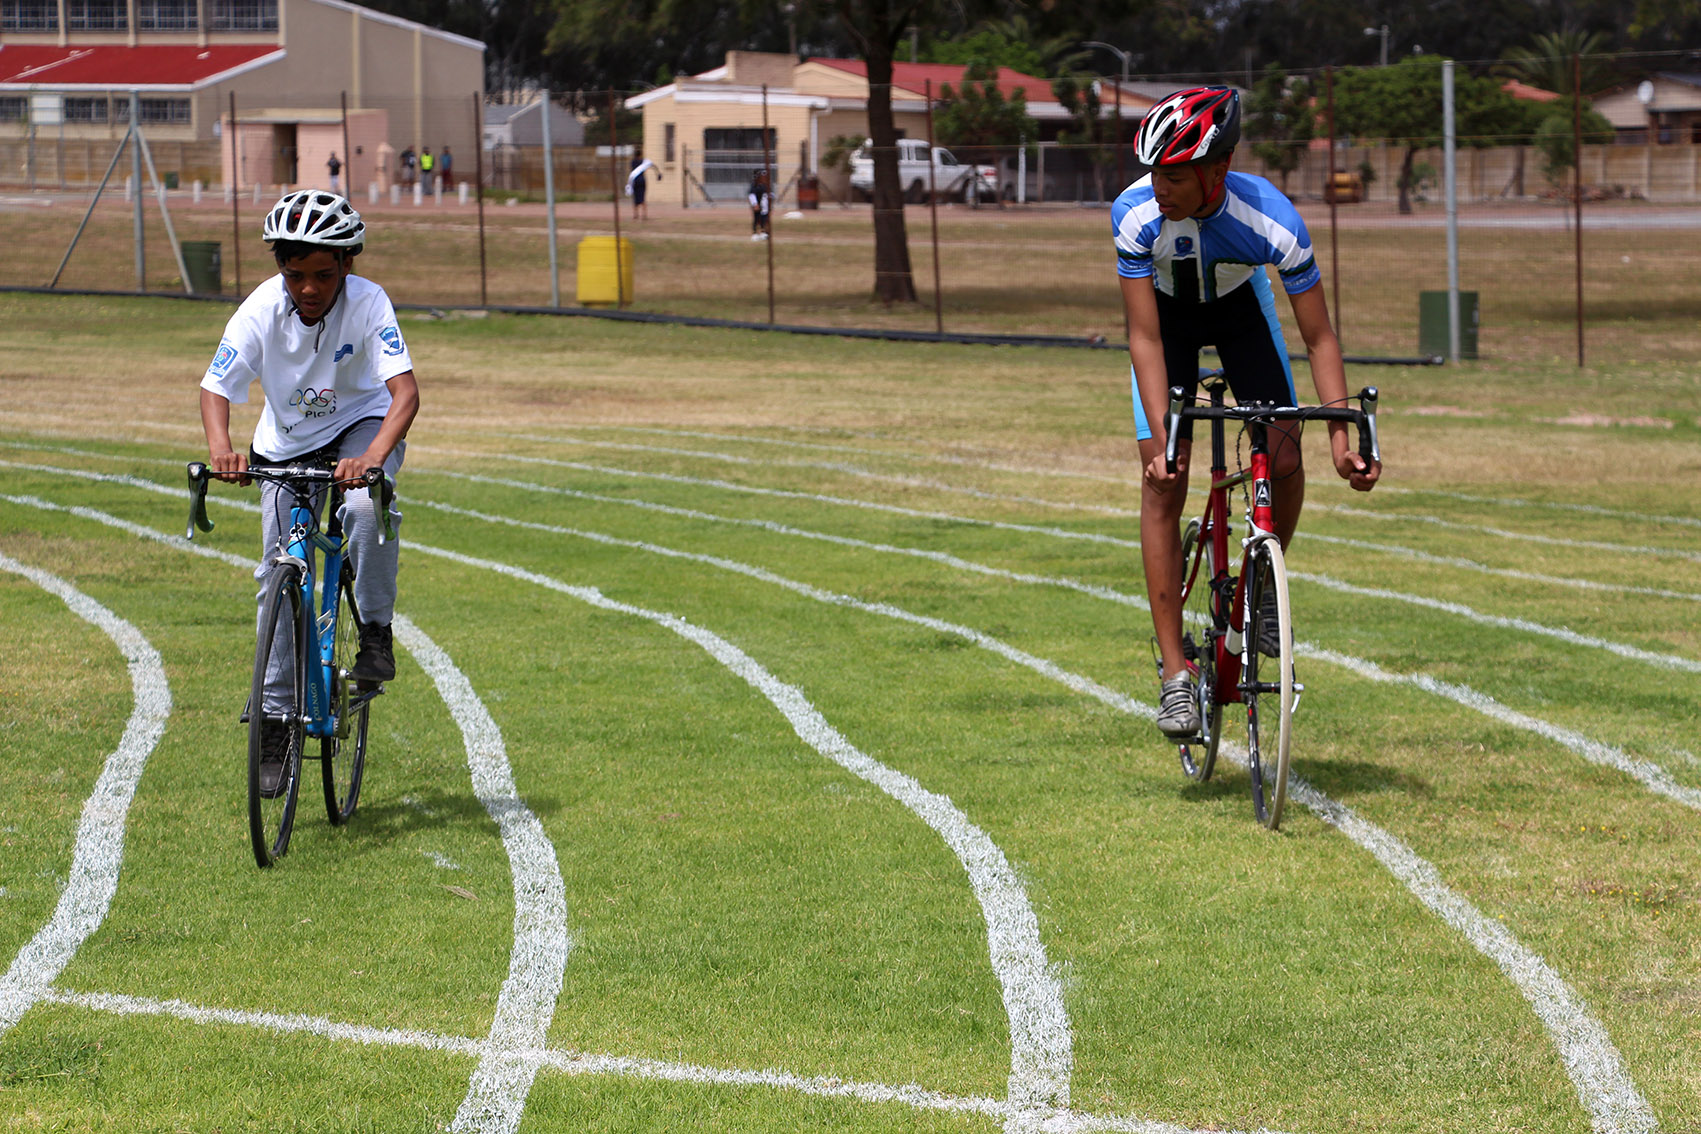 Students could try out their cycling skills